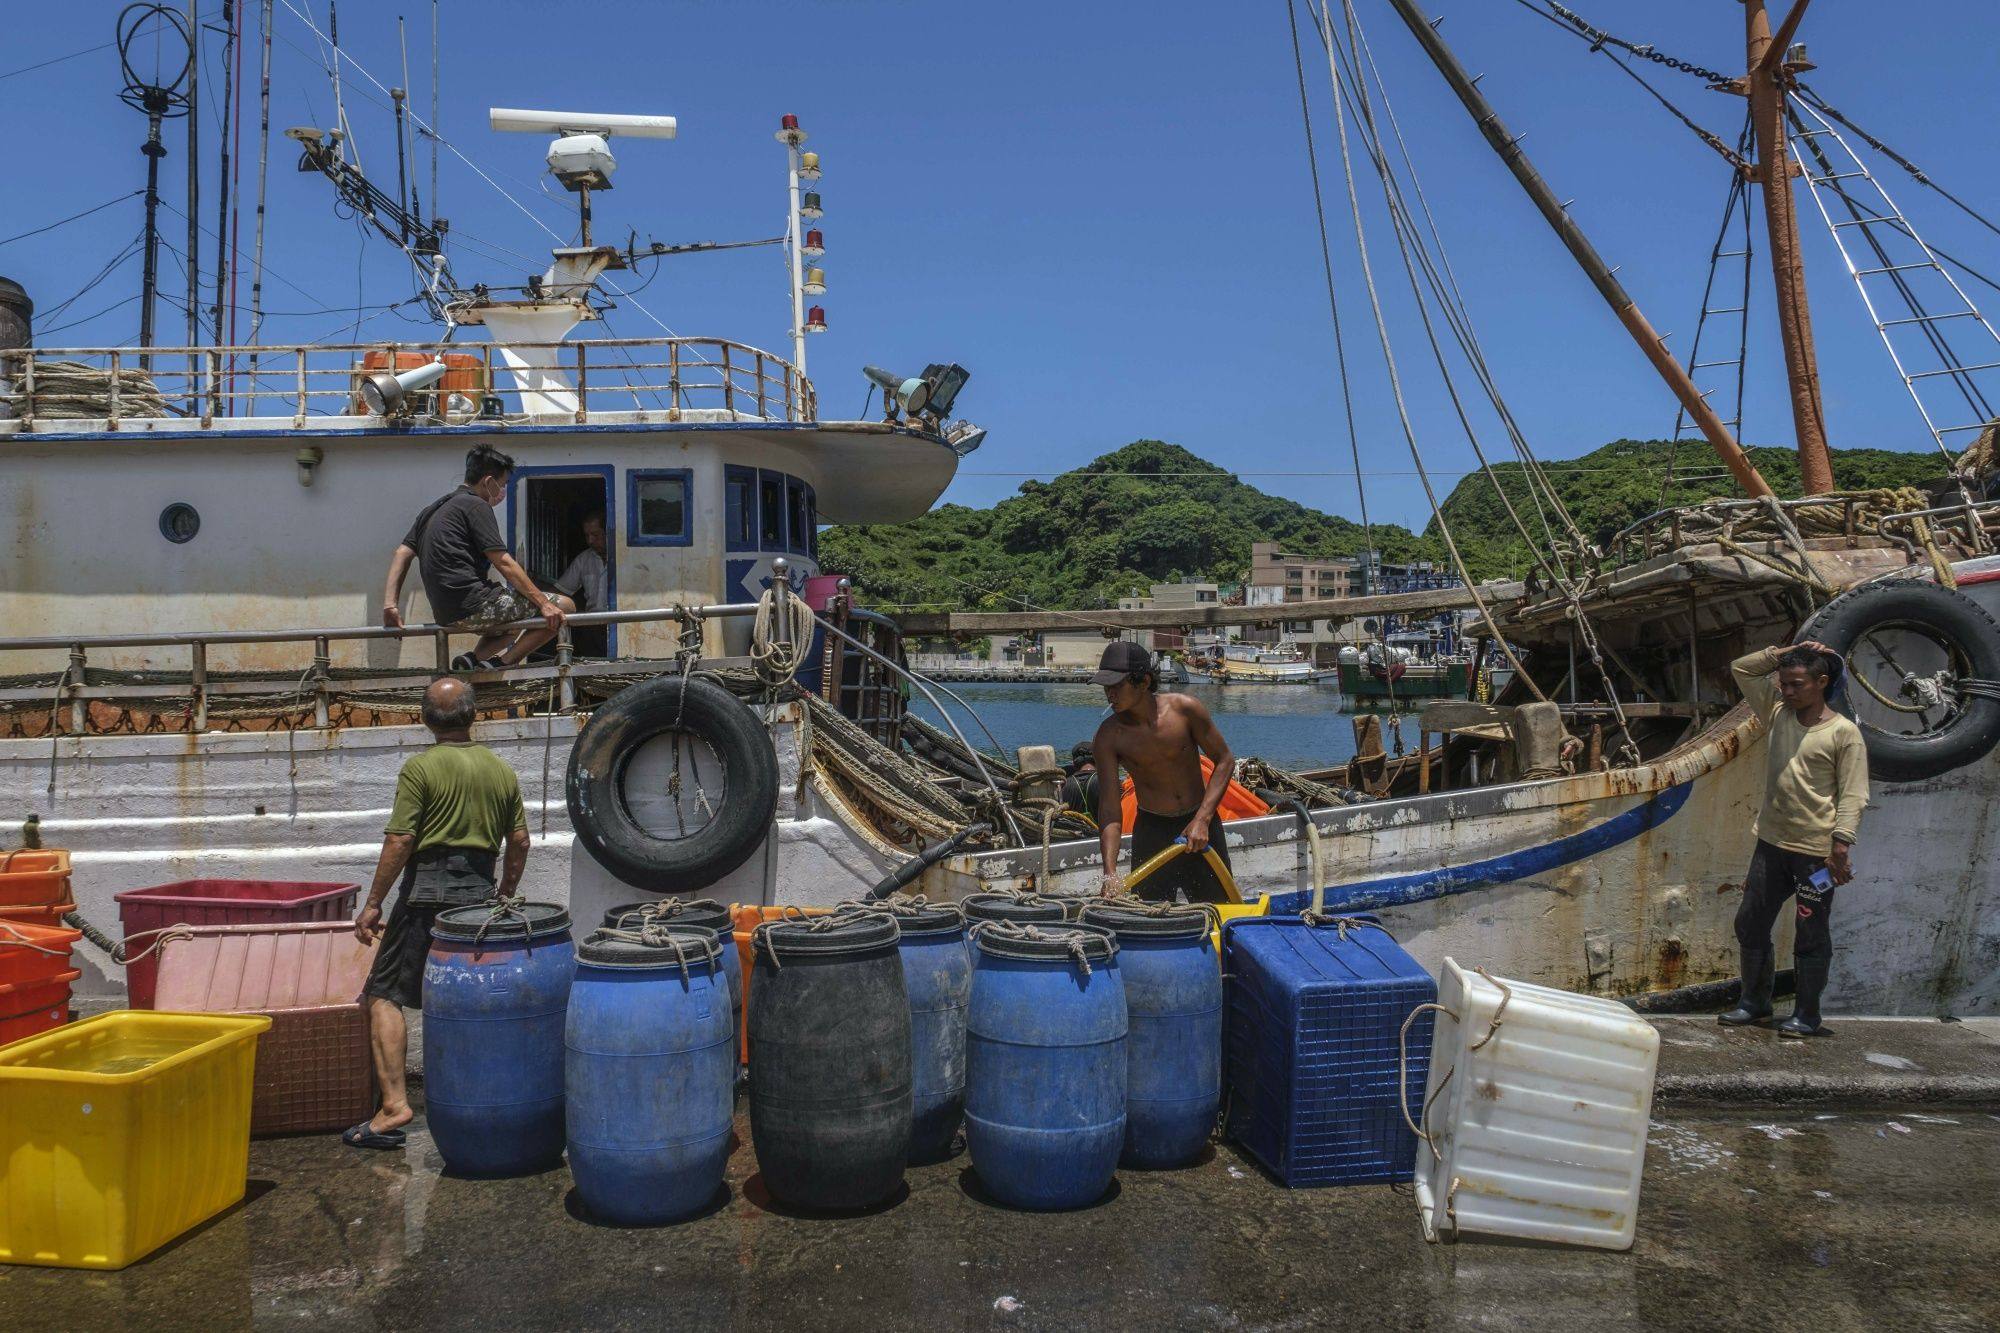 Migrant workers from Indonesia, Vietnam and the Philippines account for a large portion of Taiwan’s fishing crews. Photo: Bloomberg